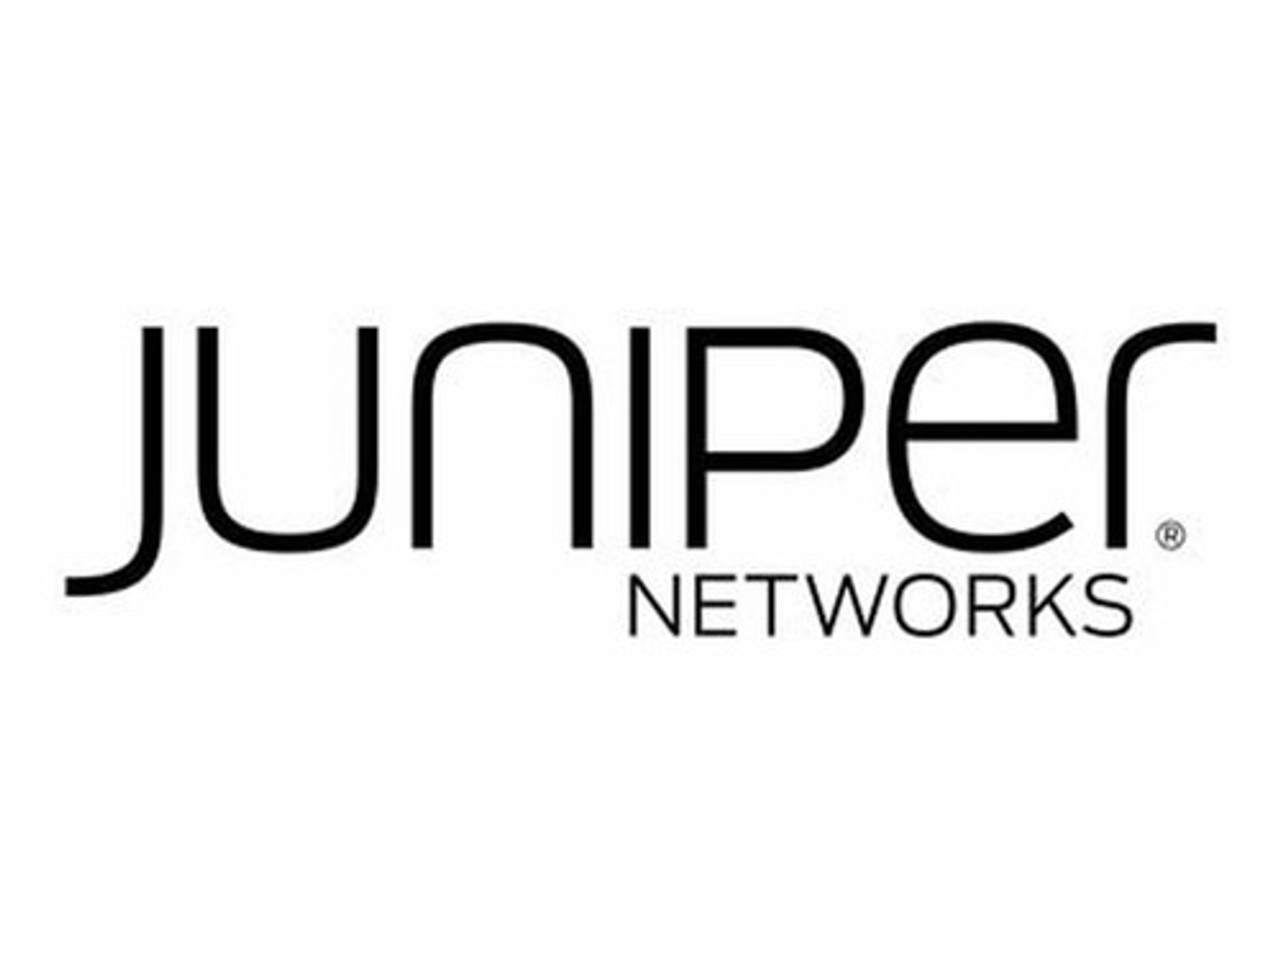 Juniper Care Same Day Support For FPC-SFF-PTX-TY5